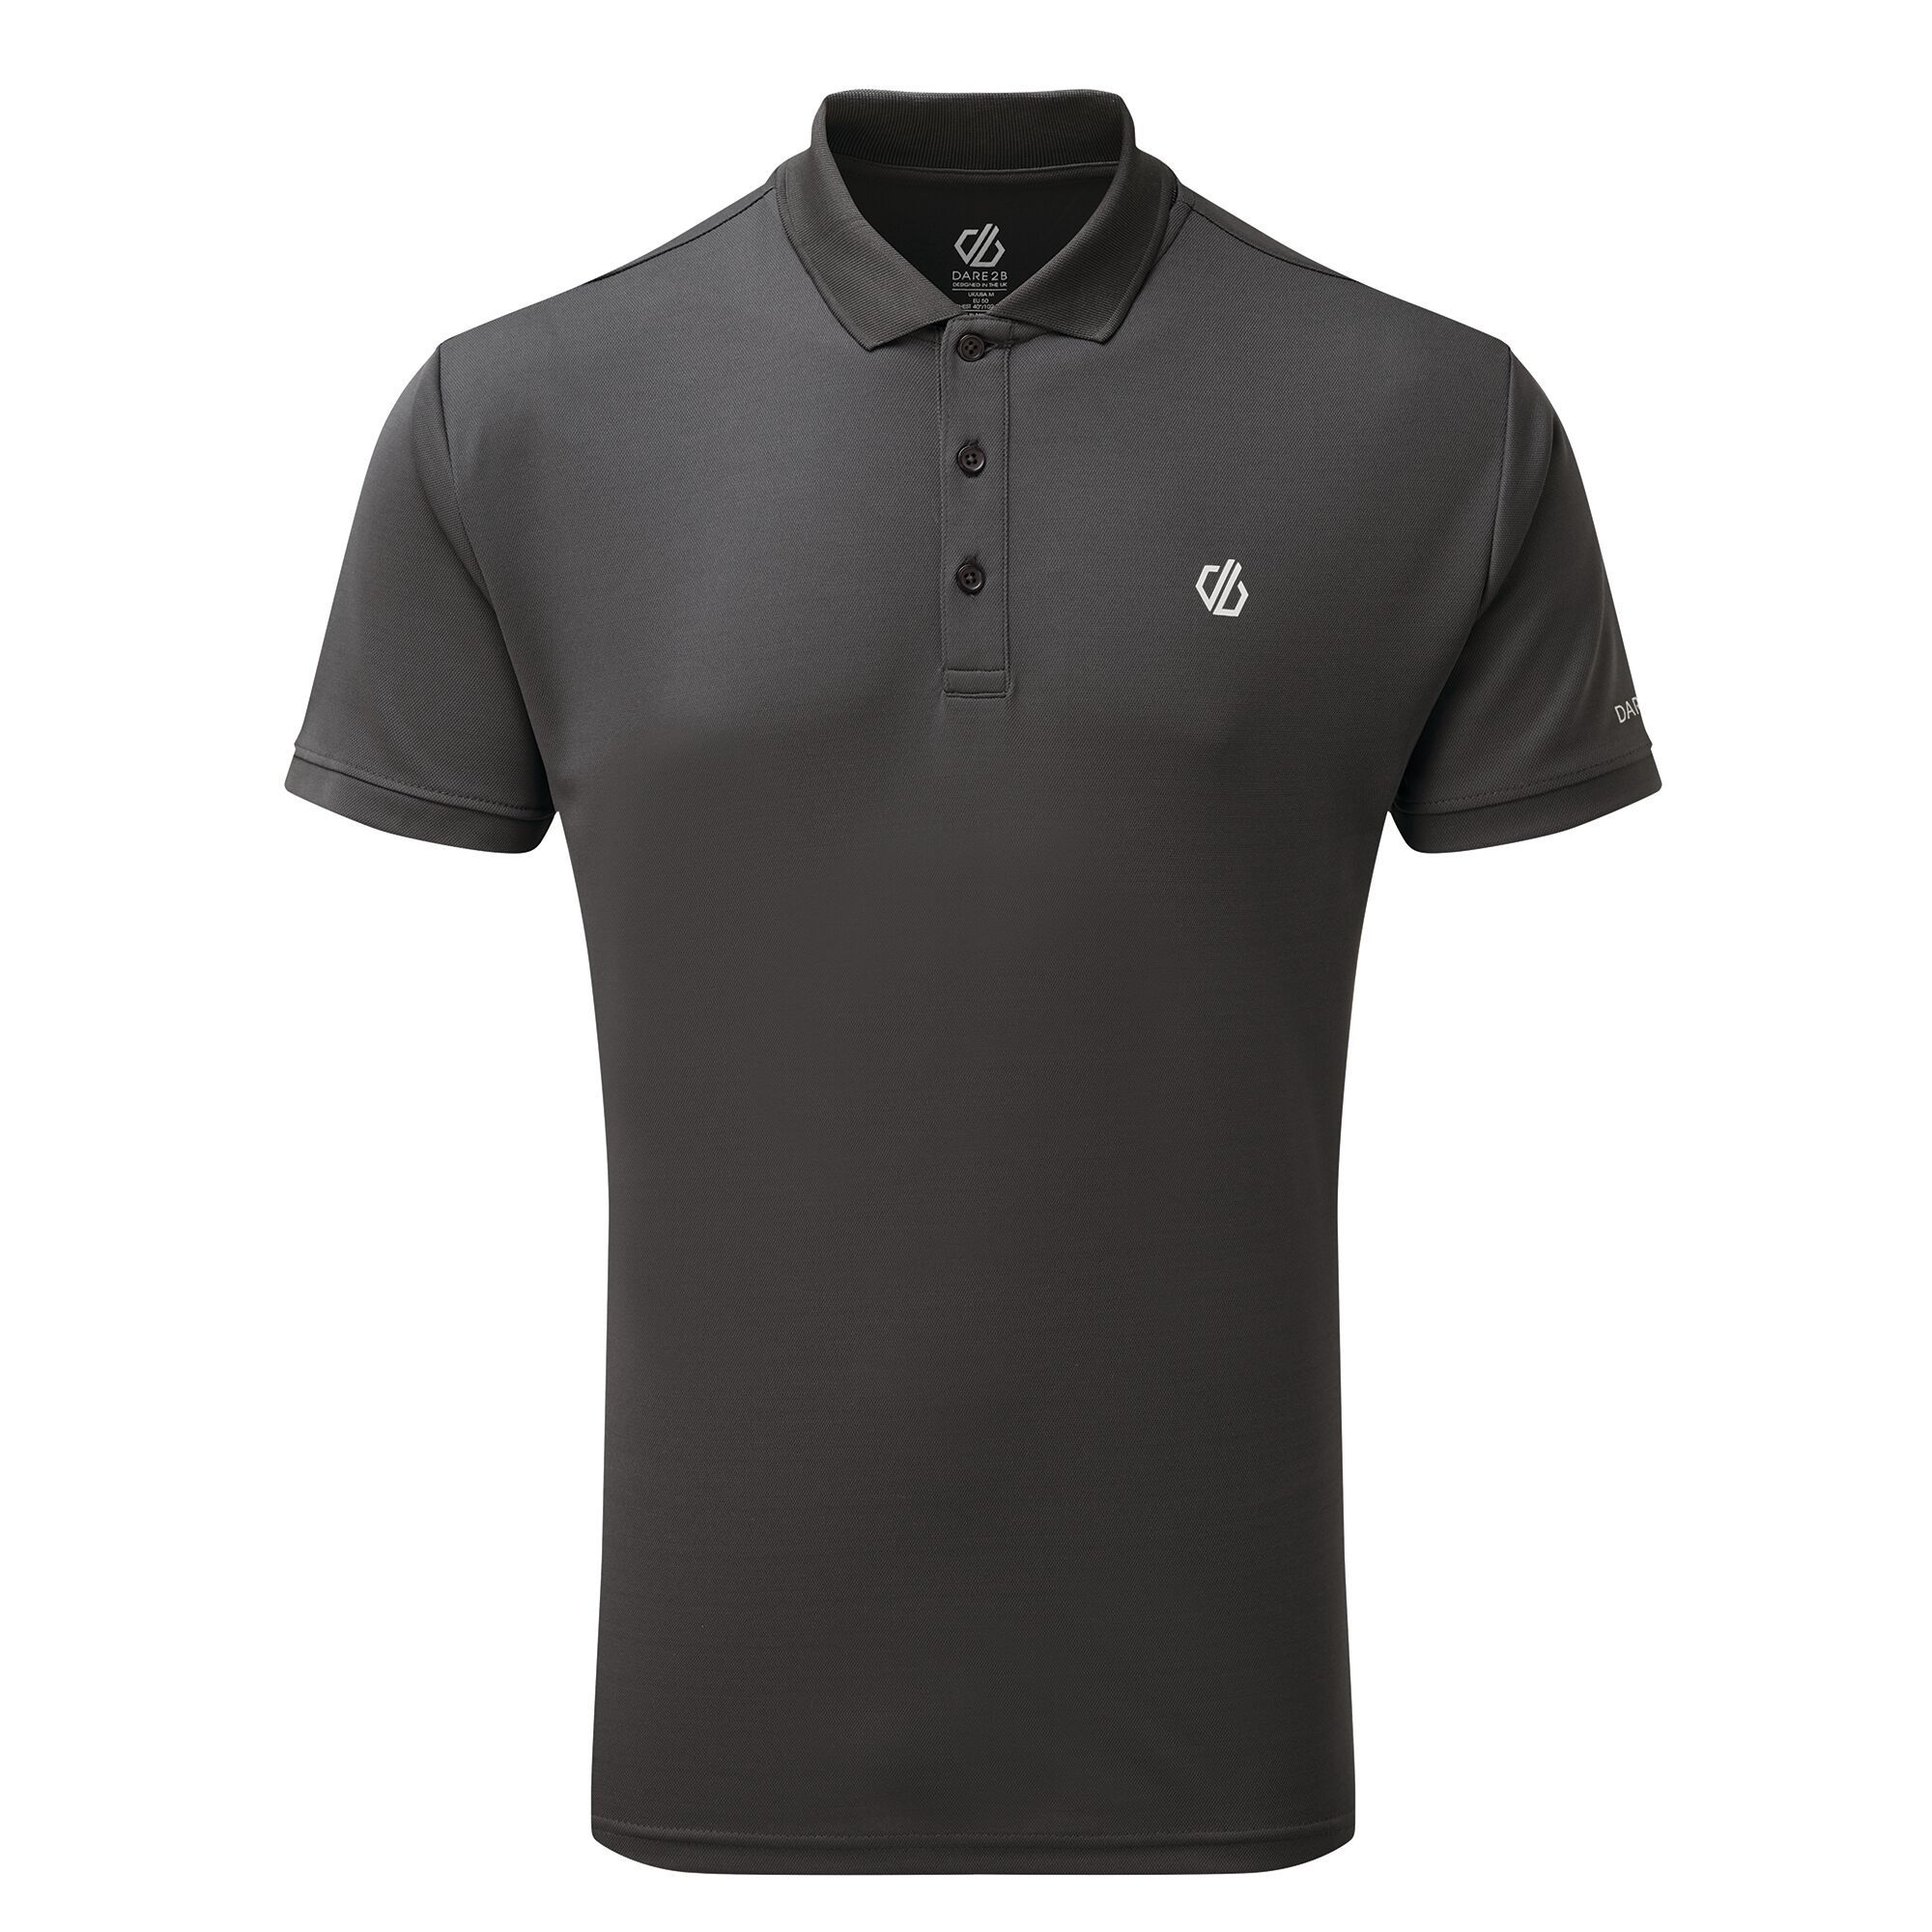 100% polyester Q-Wic plus lightweight pique fabric.  odour control treatment. Good wicking performance. Ribbed collar. 3 button placket. 3 compartment pockets at rear. Reflective detail for enhanced visibility.